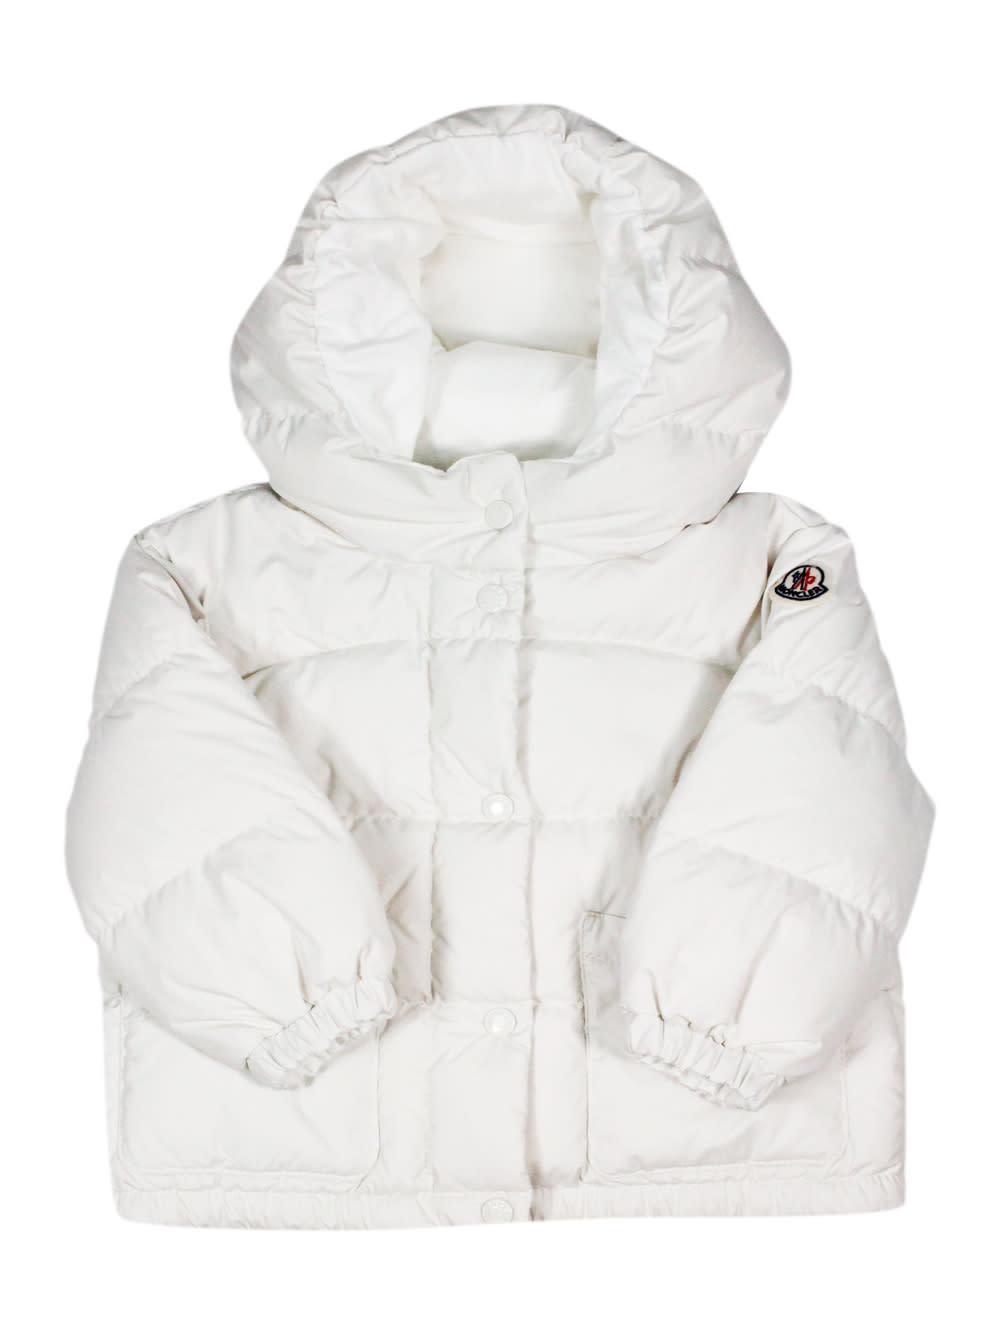 Moncler Ebre Down Jacket Padded With Real White Goose Down With Hood, Zip And Snap Button Closure And Front Pockets